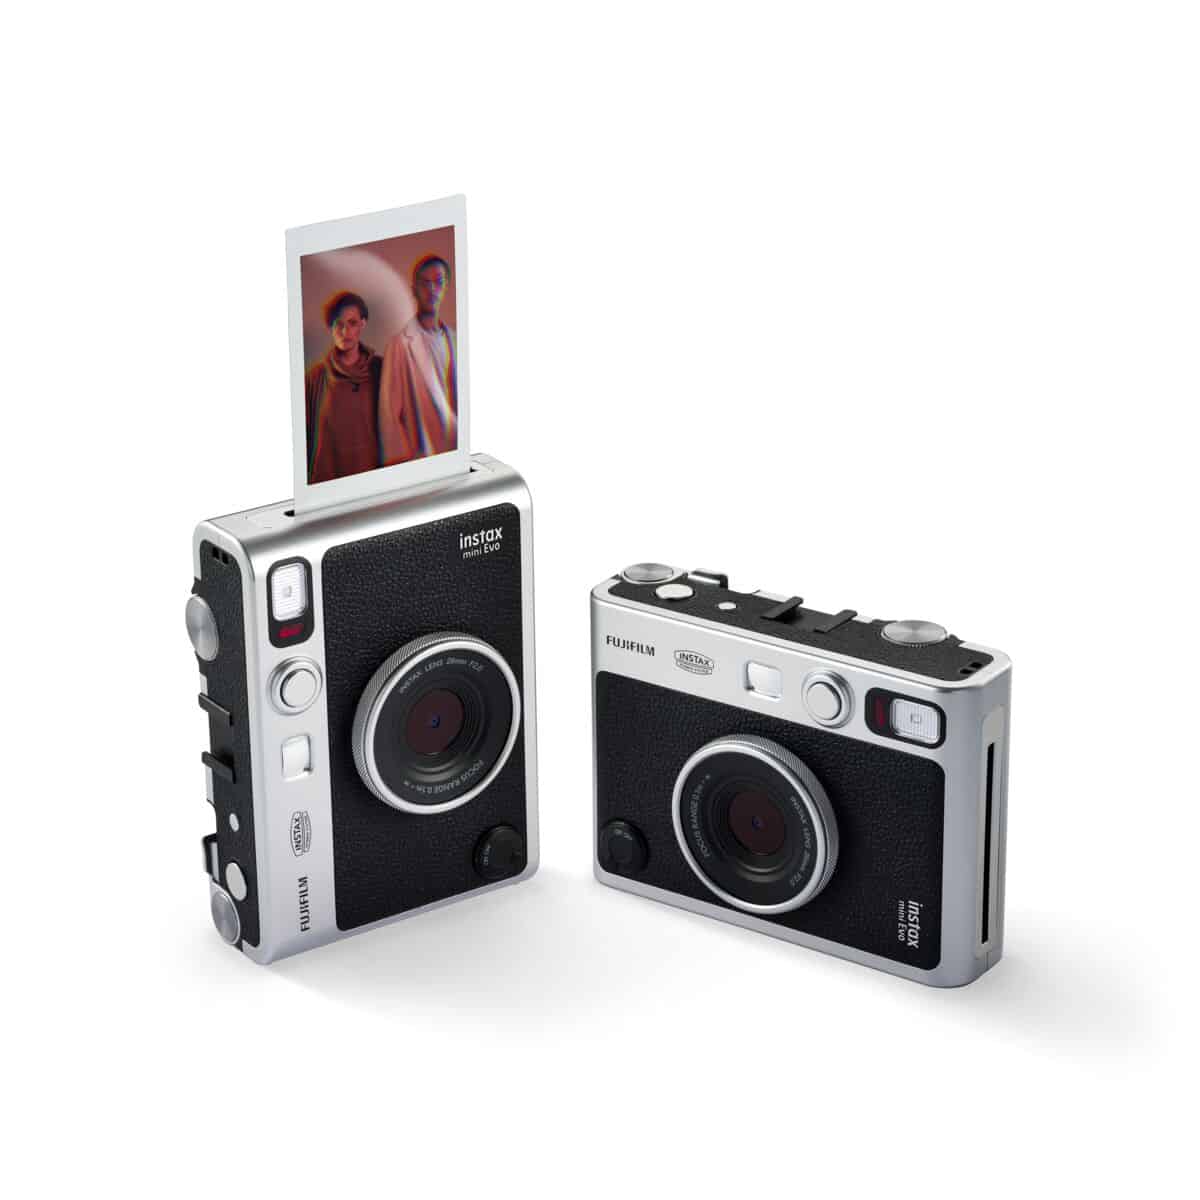 ideal graduation gift for a granddaughter: Digital Hybrid Instant Camera and Printer